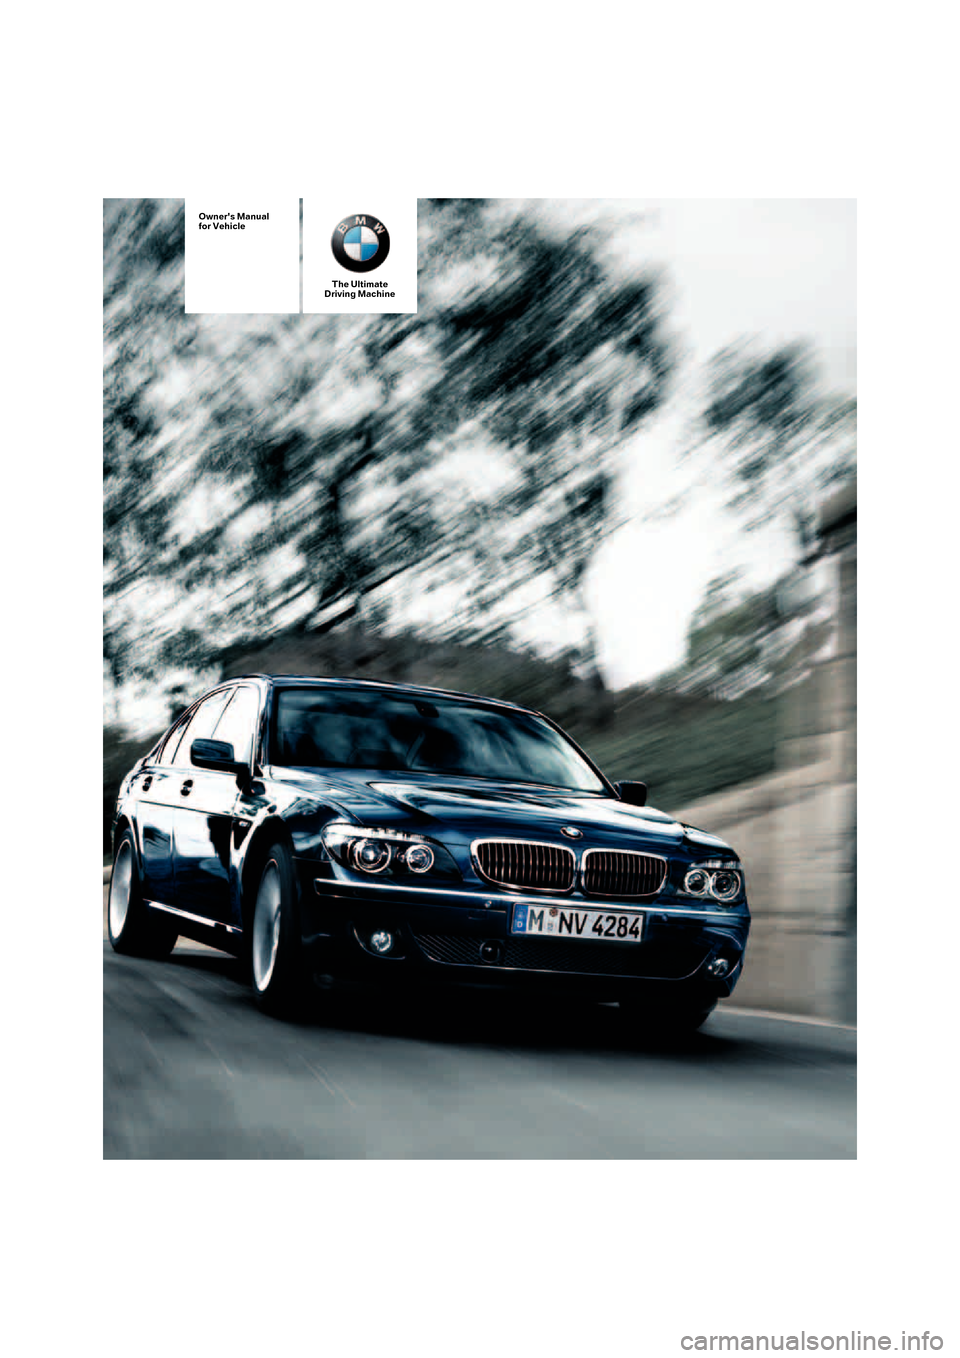 BMW 760LI 2007 E66 Owners Manual Owners Manual
for Vehicle
The Ultimate
Driving Machine 